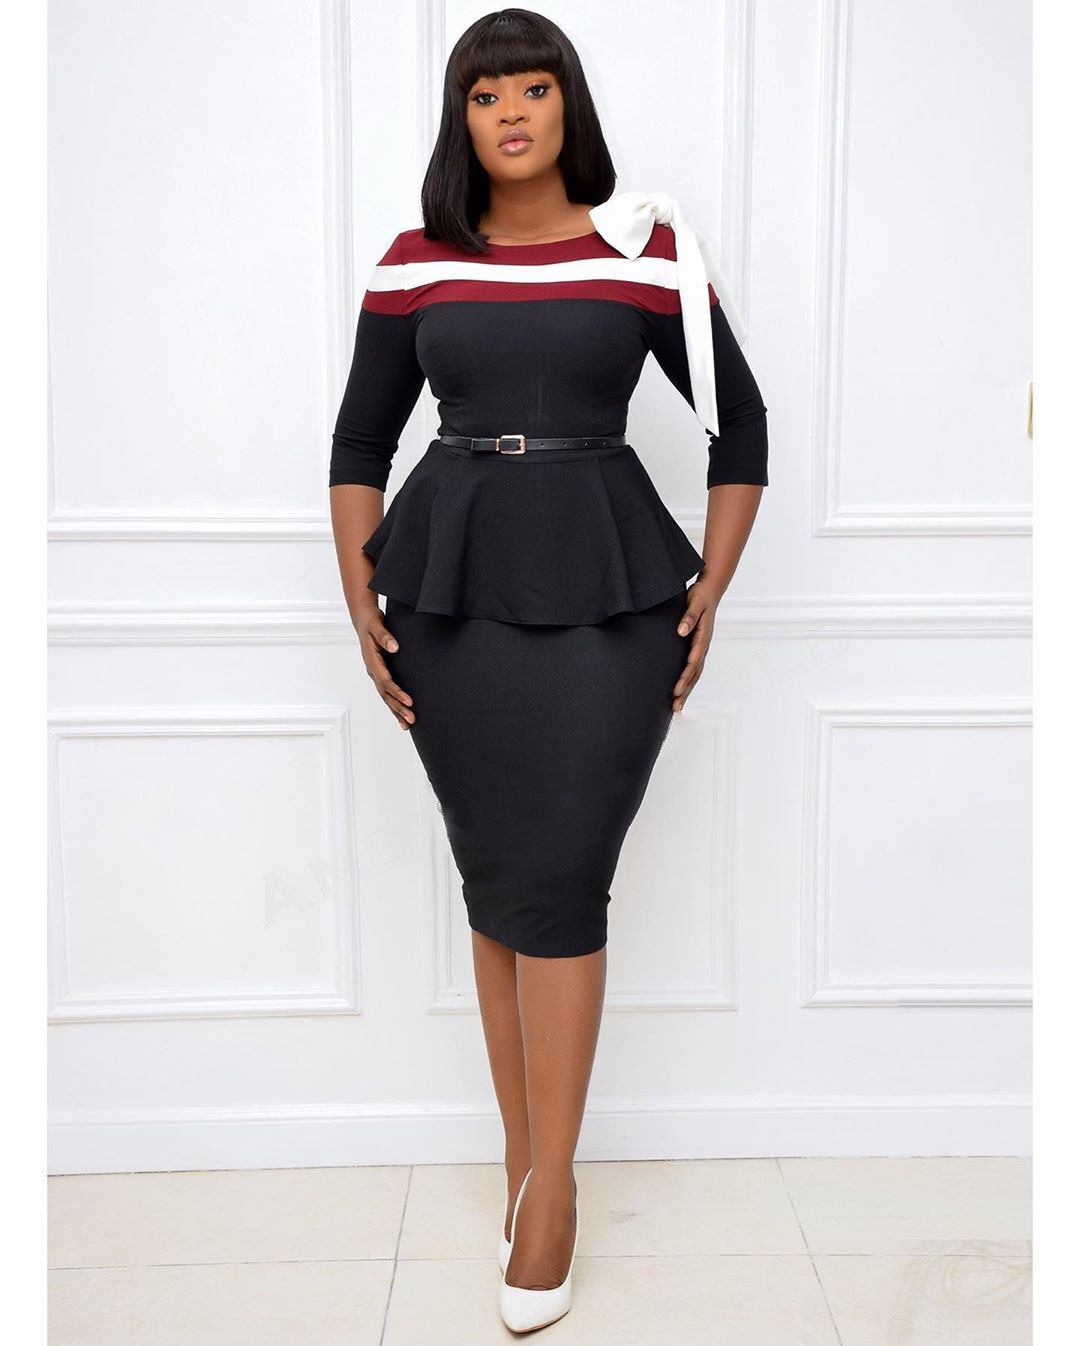 Professional African tight dress with matching ruffles - AFRICTUDES